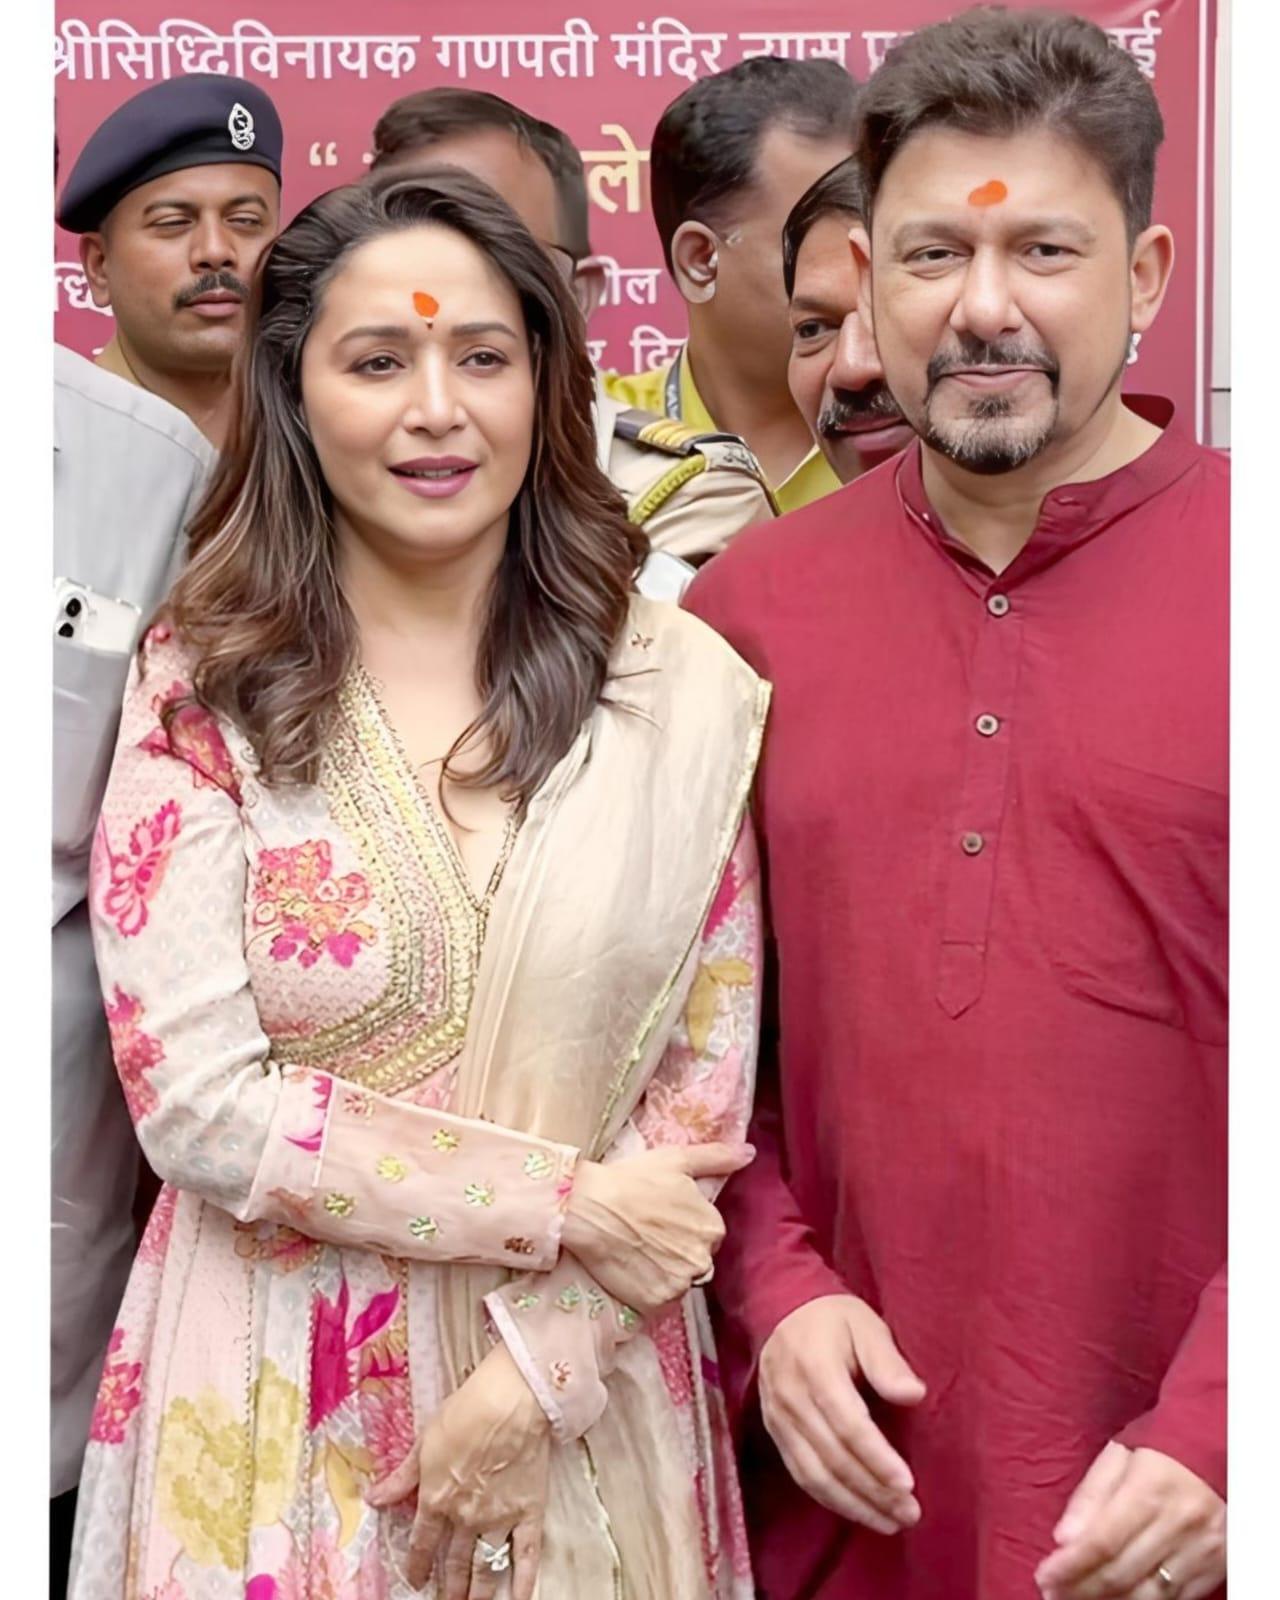 Madhuri Dixit visited Siddhivinayak with her husband Dr Nene